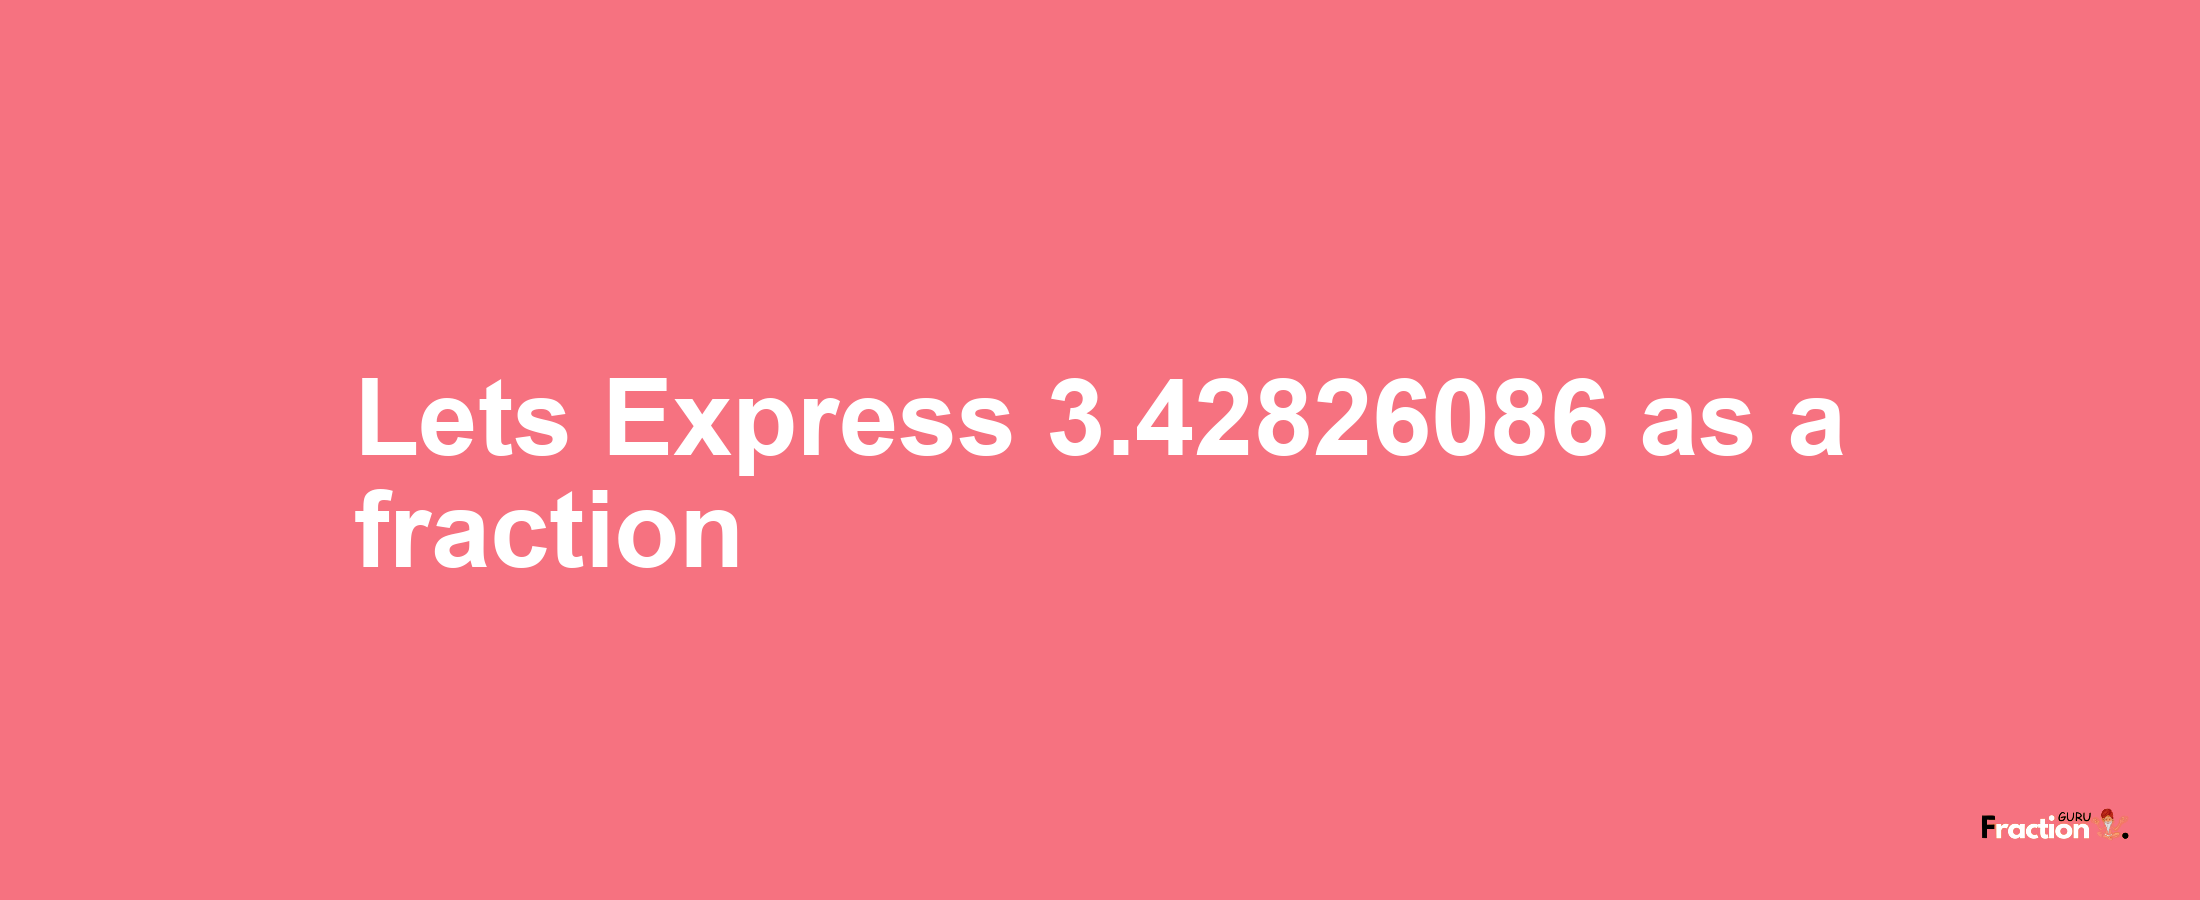 Lets Express 3.42826086 as afraction